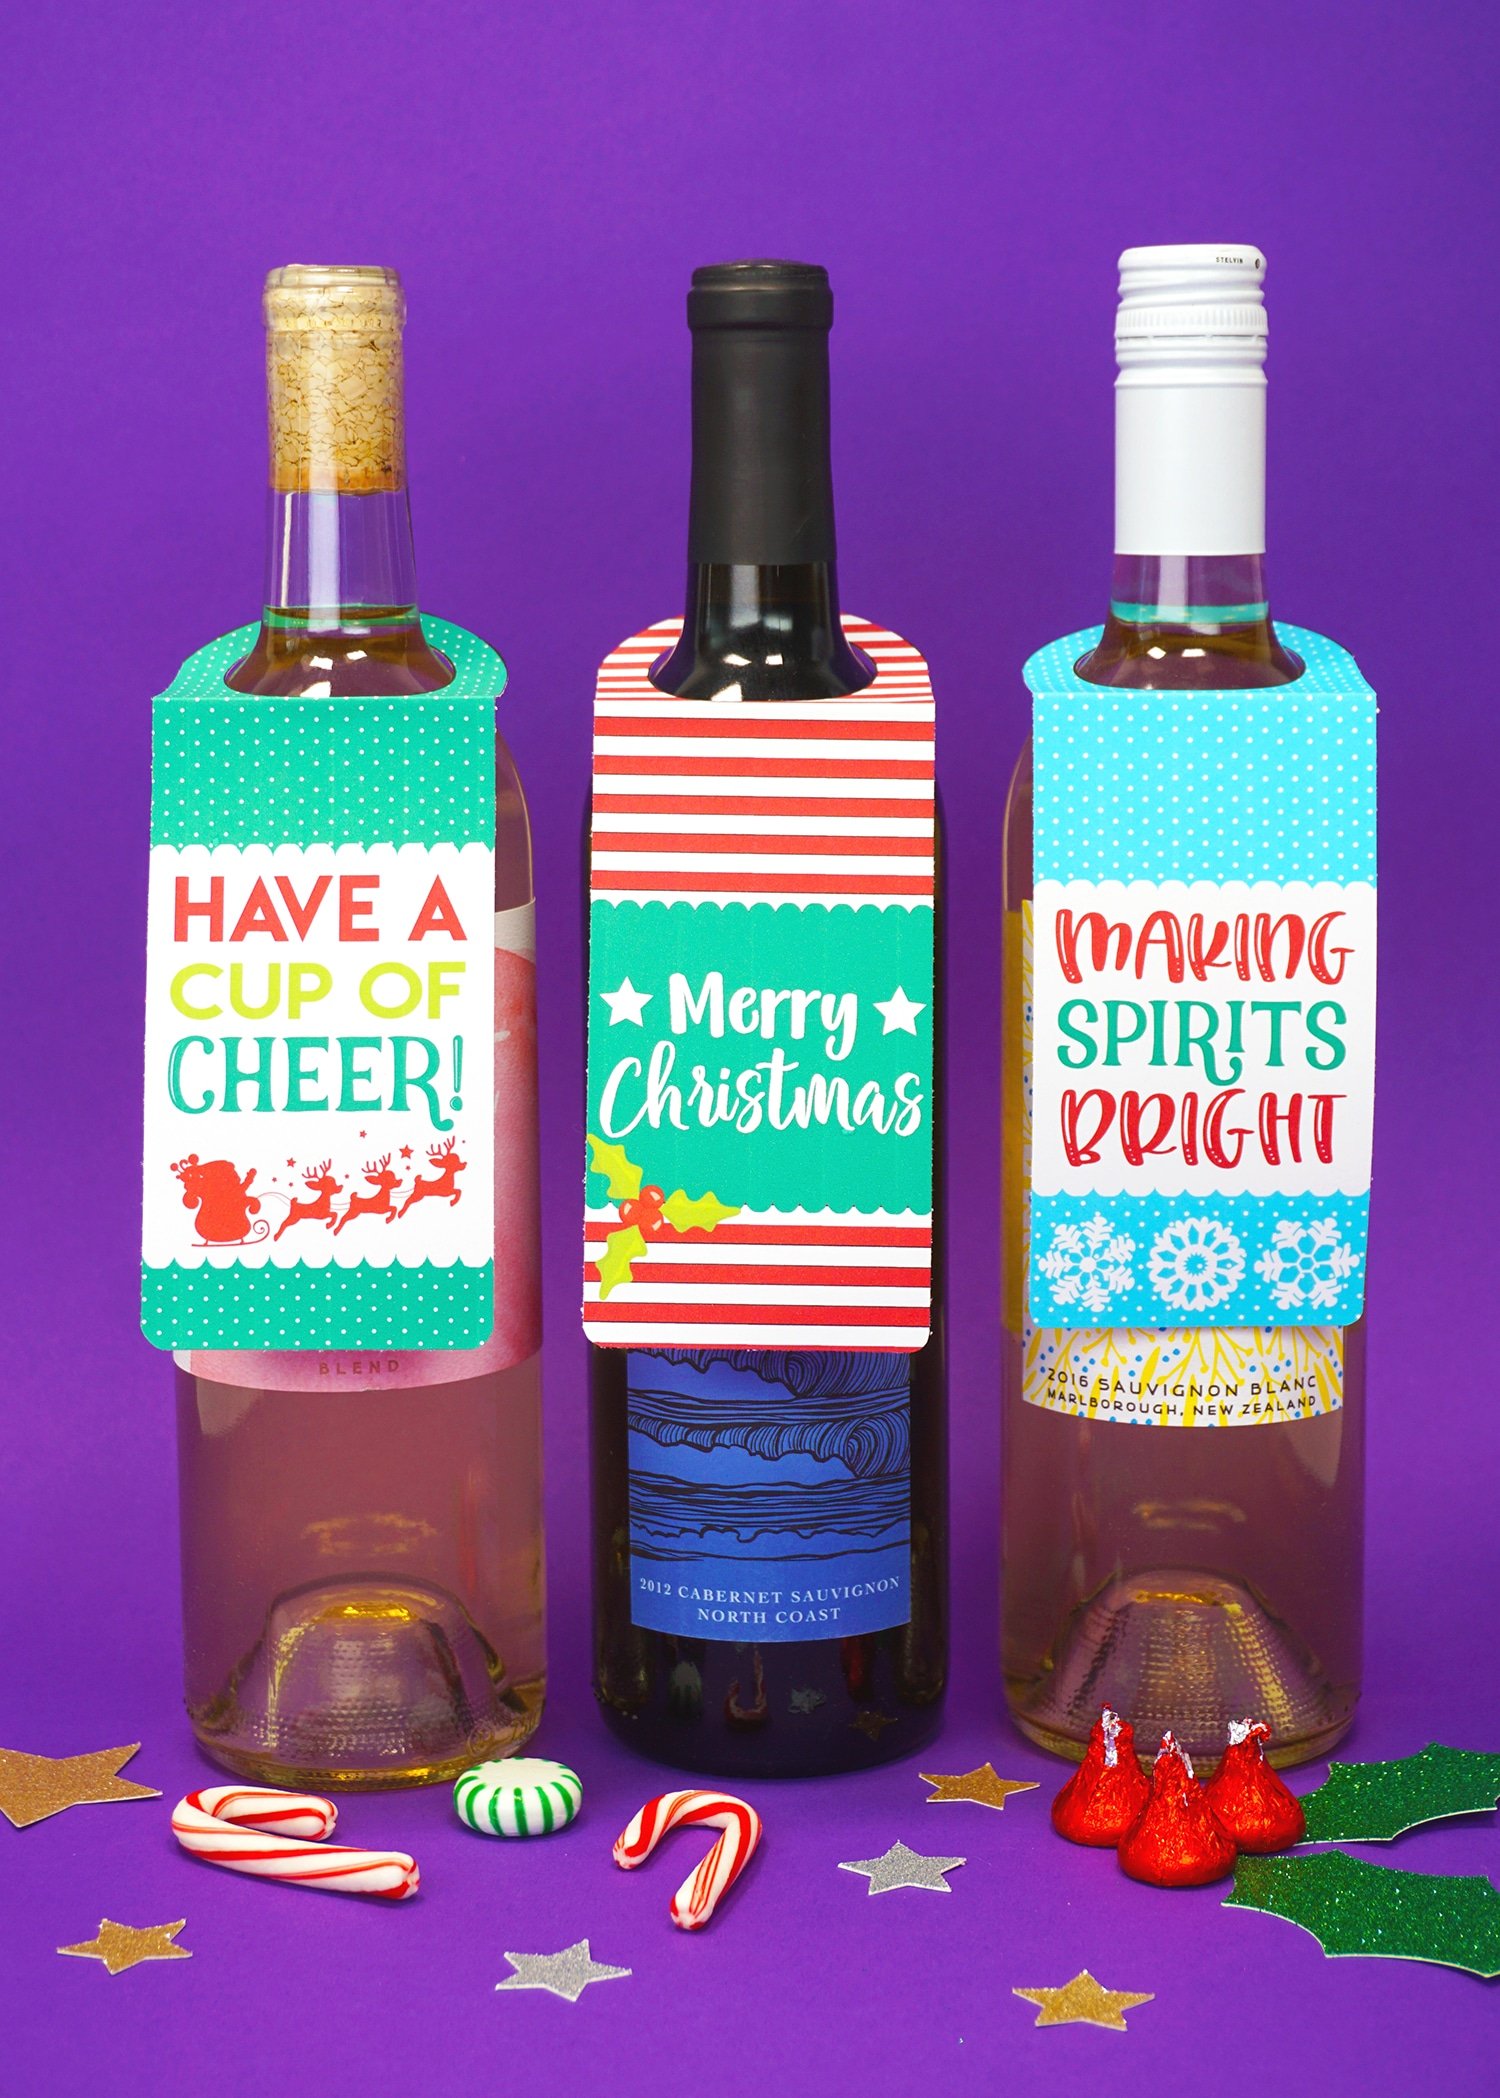 Three bottles of wine on purple background with "Have a Cup of Cheer" and "Merry Christmas" and "Making Spirits Bright" printable Christmas wine bottle gift tags